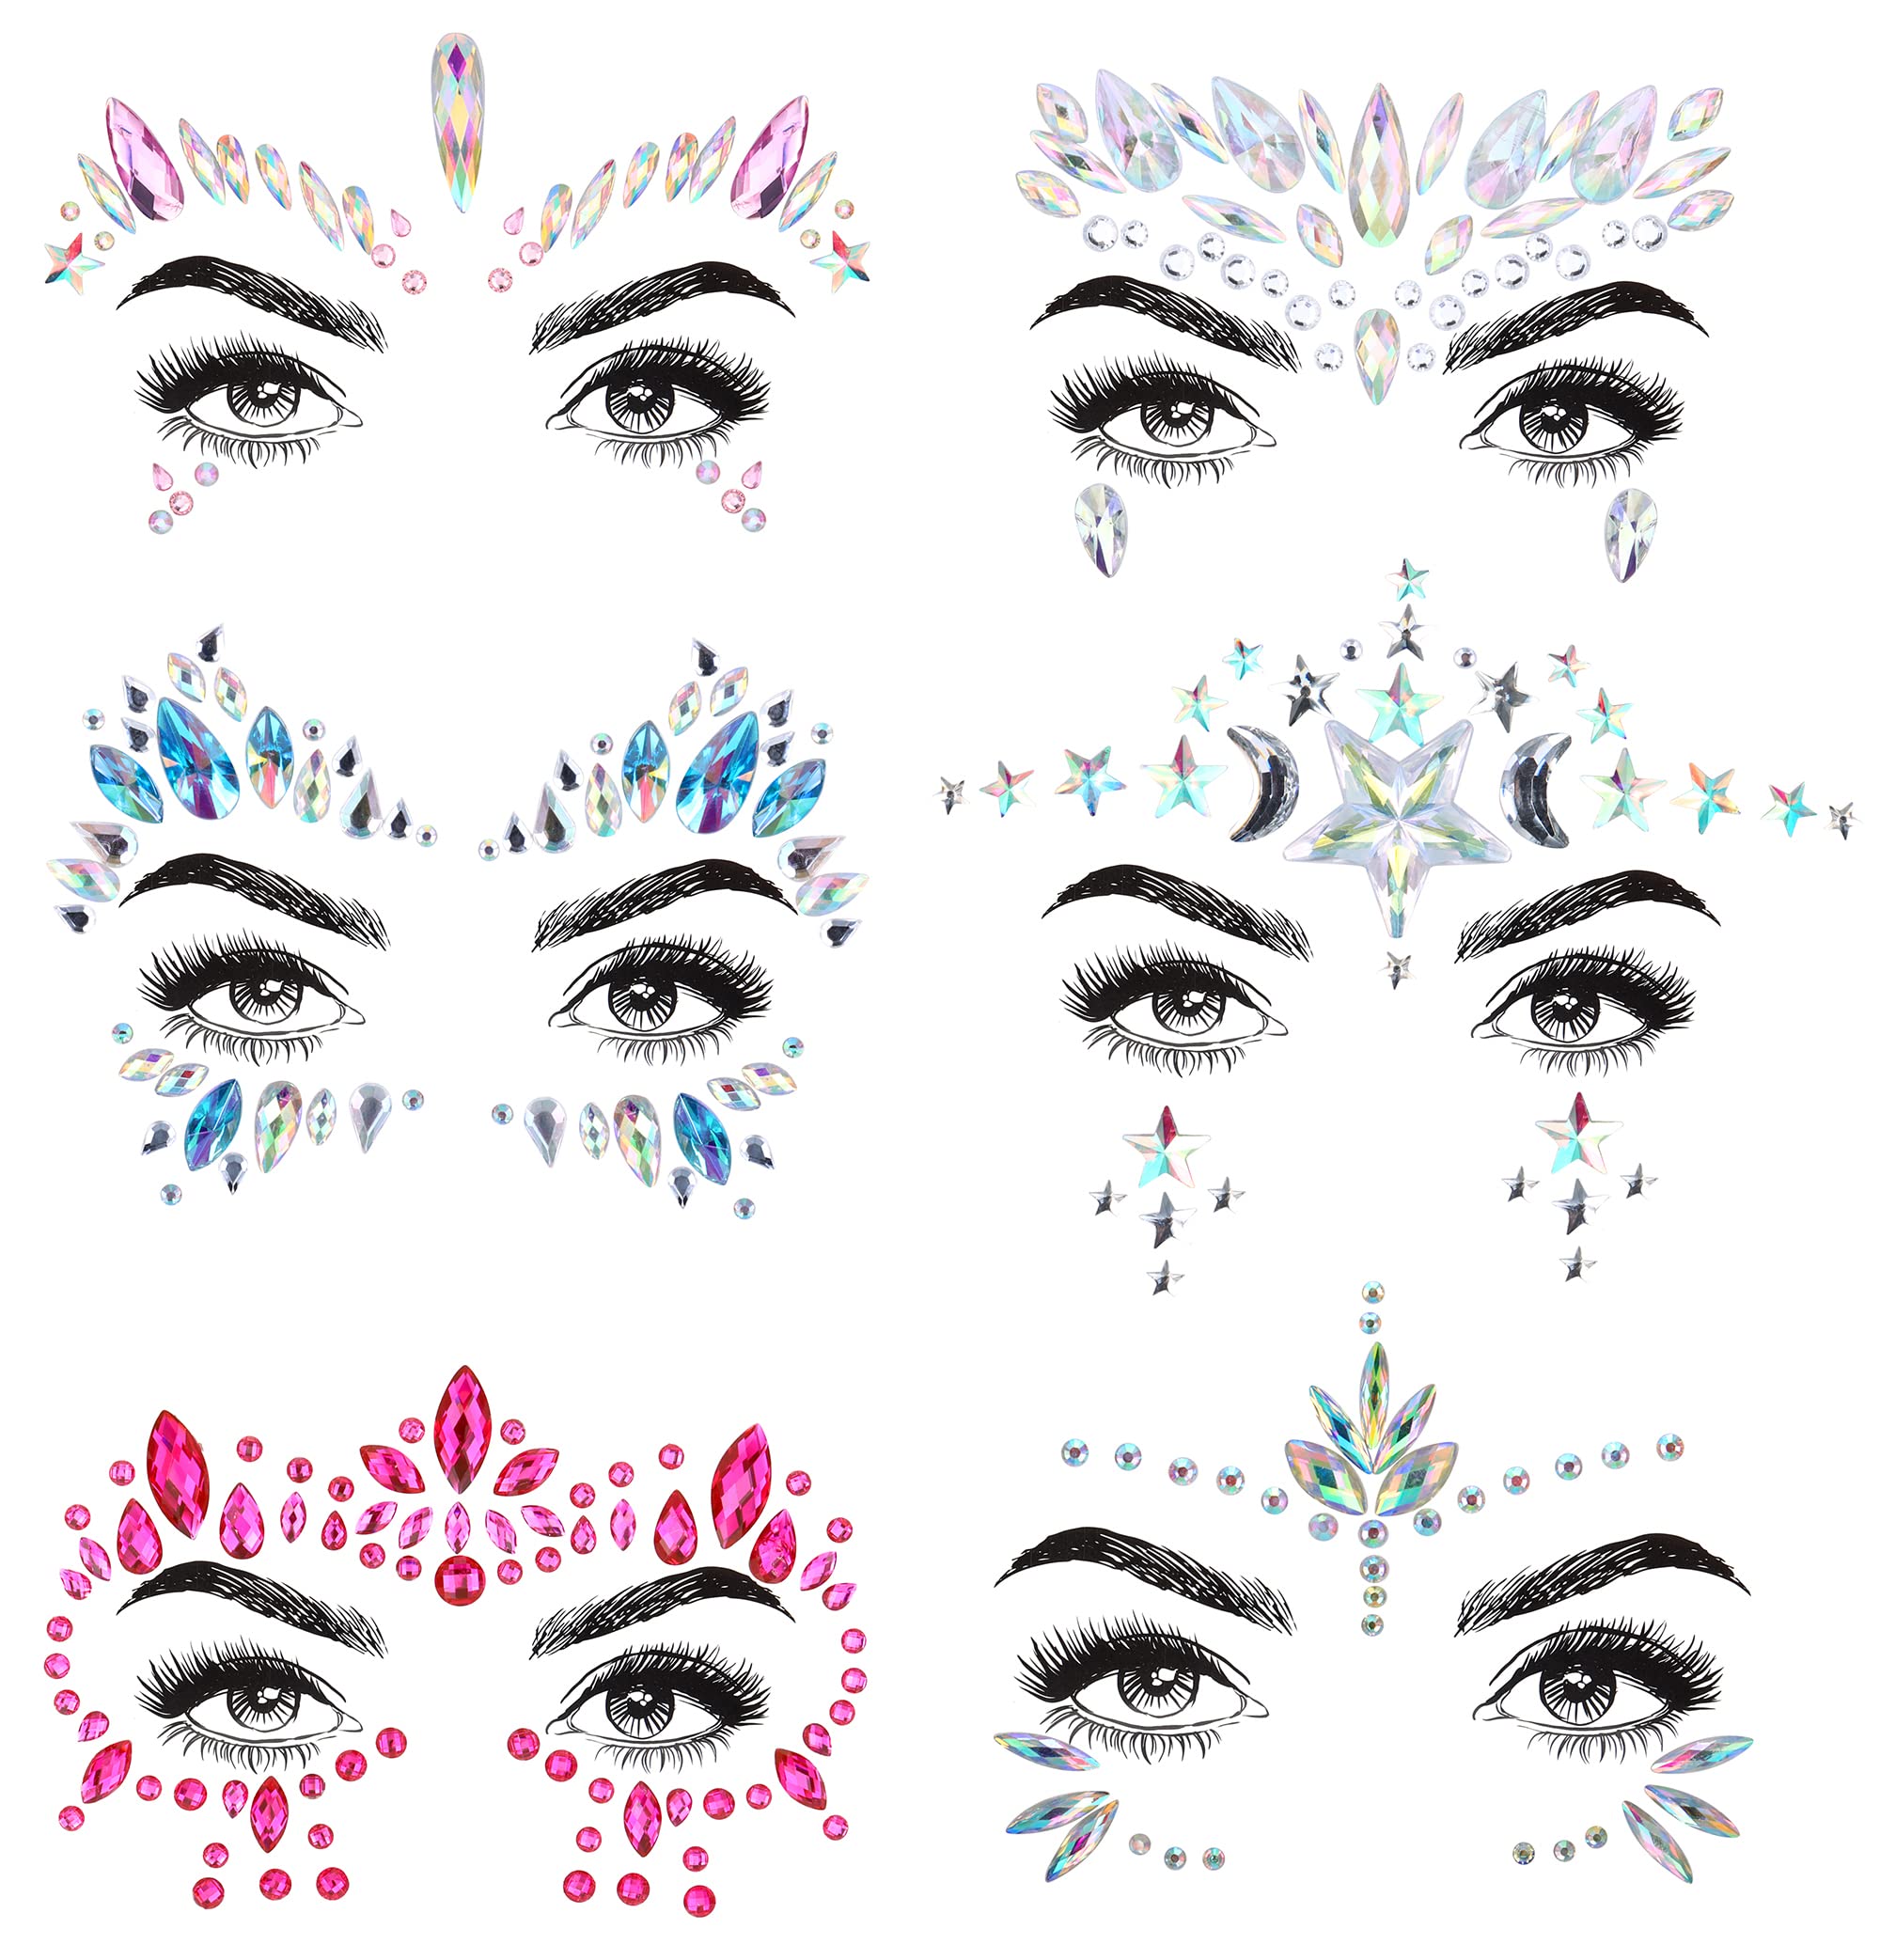 Helicopchain 6Pcs Face Gems Stickers Rhinestones Makeup Gems for Eyes Face Jewels Stick on Rave Mermaid Costume Accessories Eyes Face Body Temporary Tattoos Festival Party